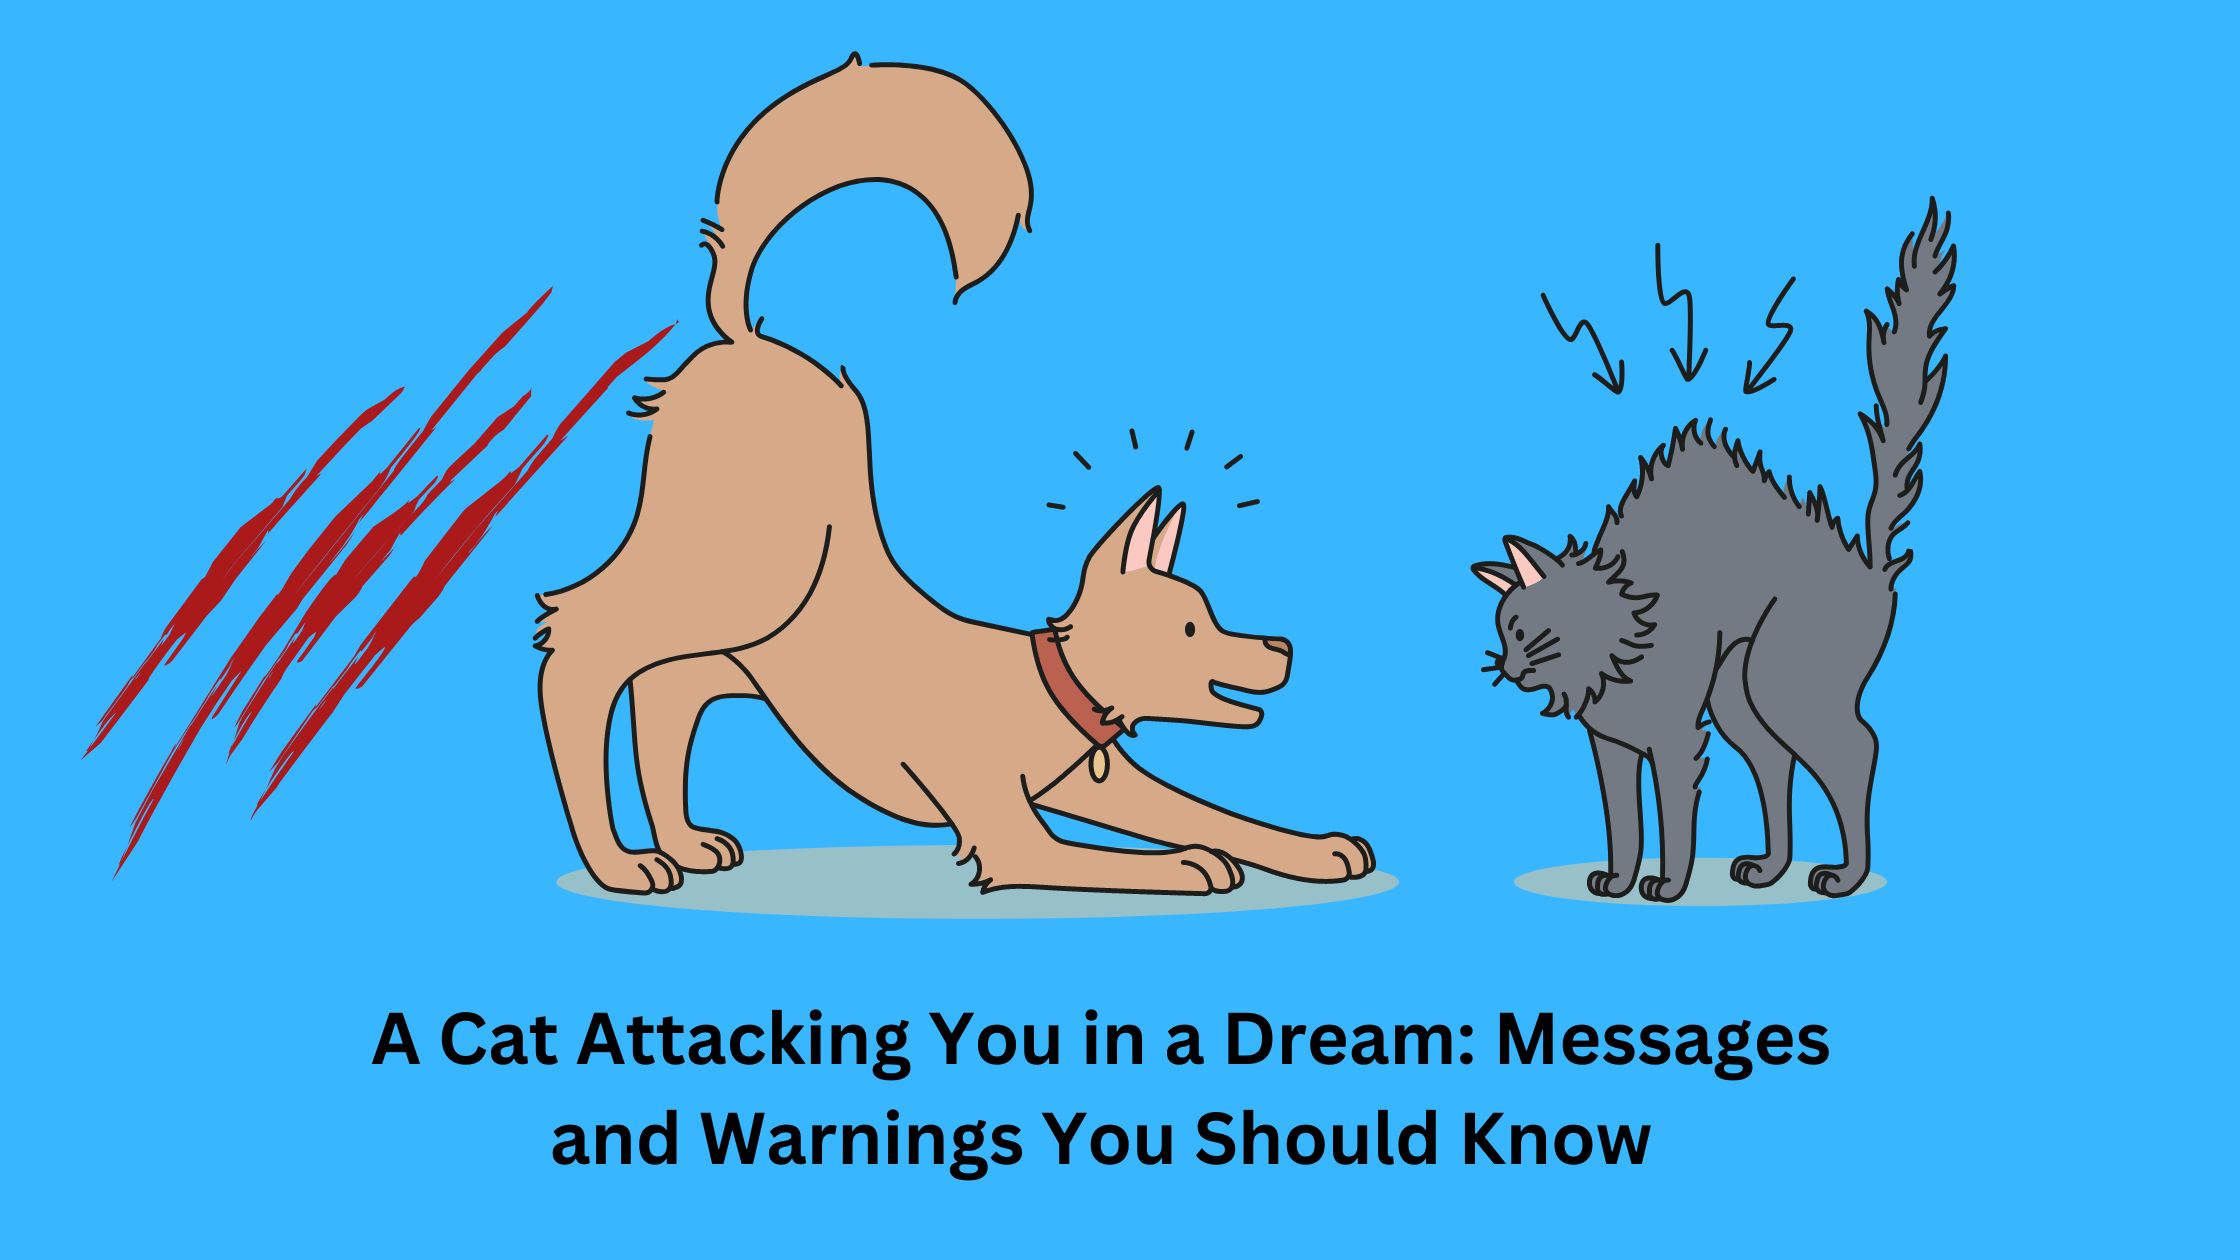 A Cat Attacking You in a Dream Messages and Warnings You Should Know